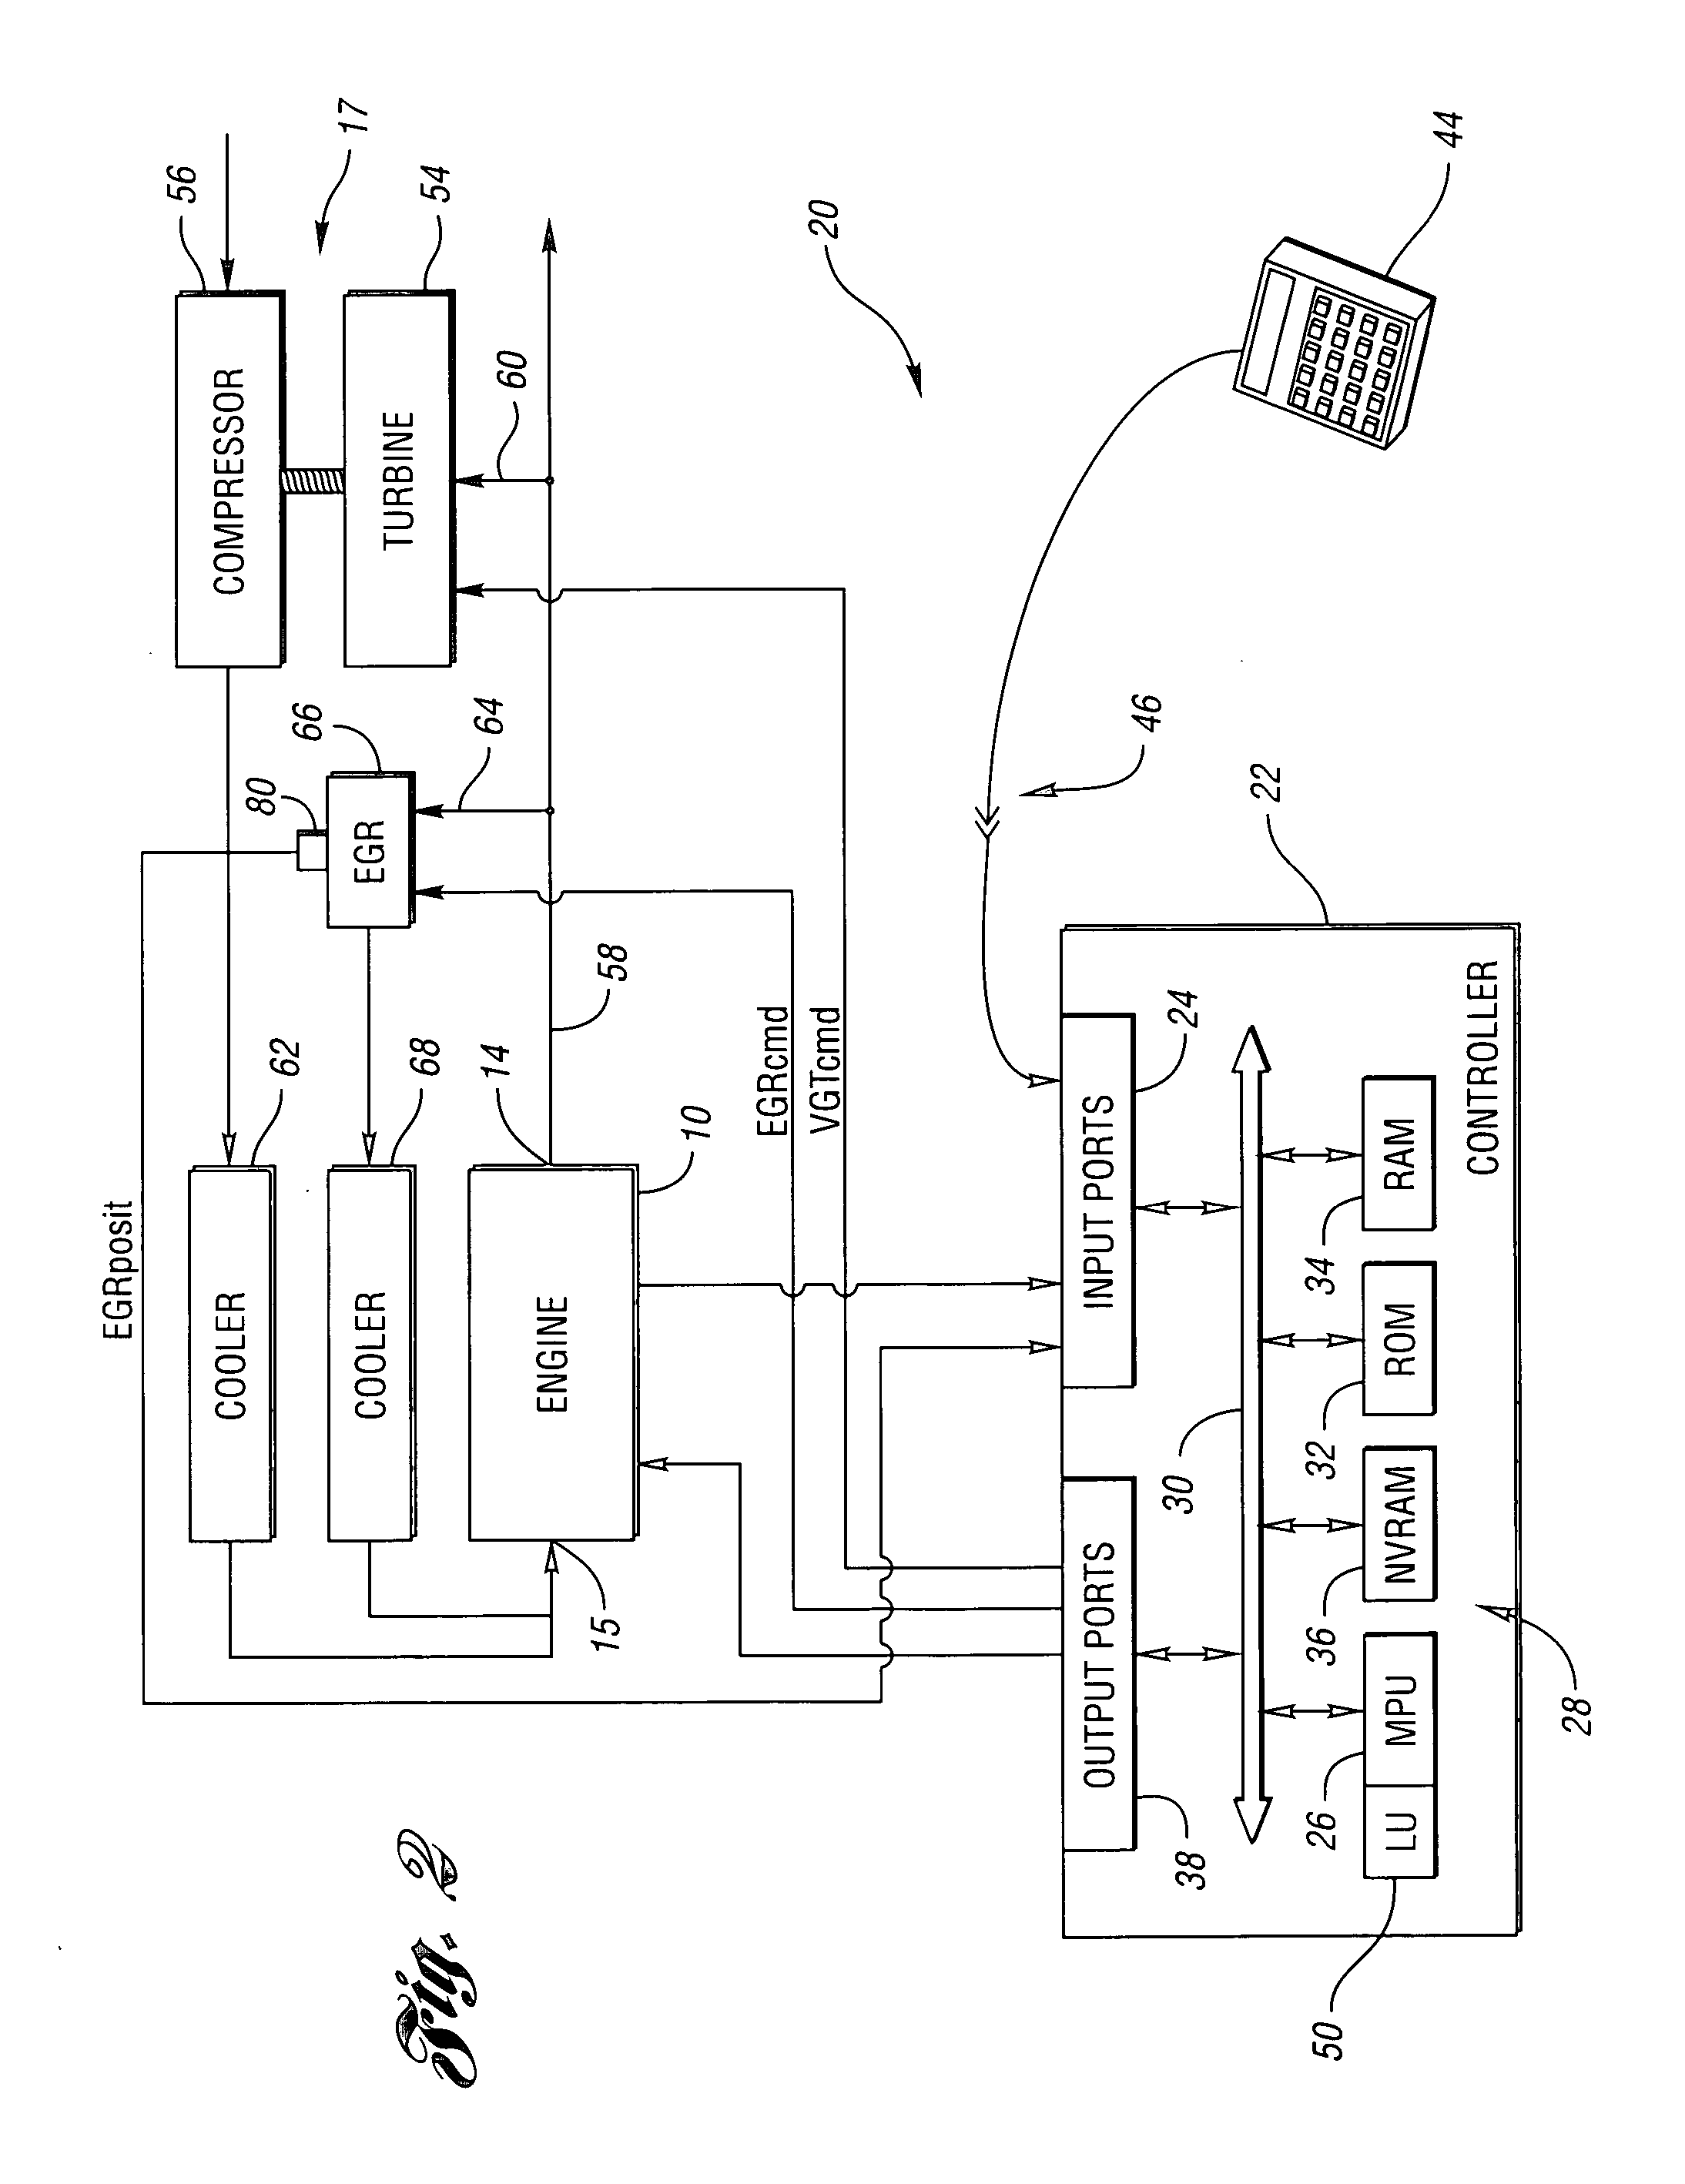 Method for controlling an internal combustion engine using model based VGT/EGR control